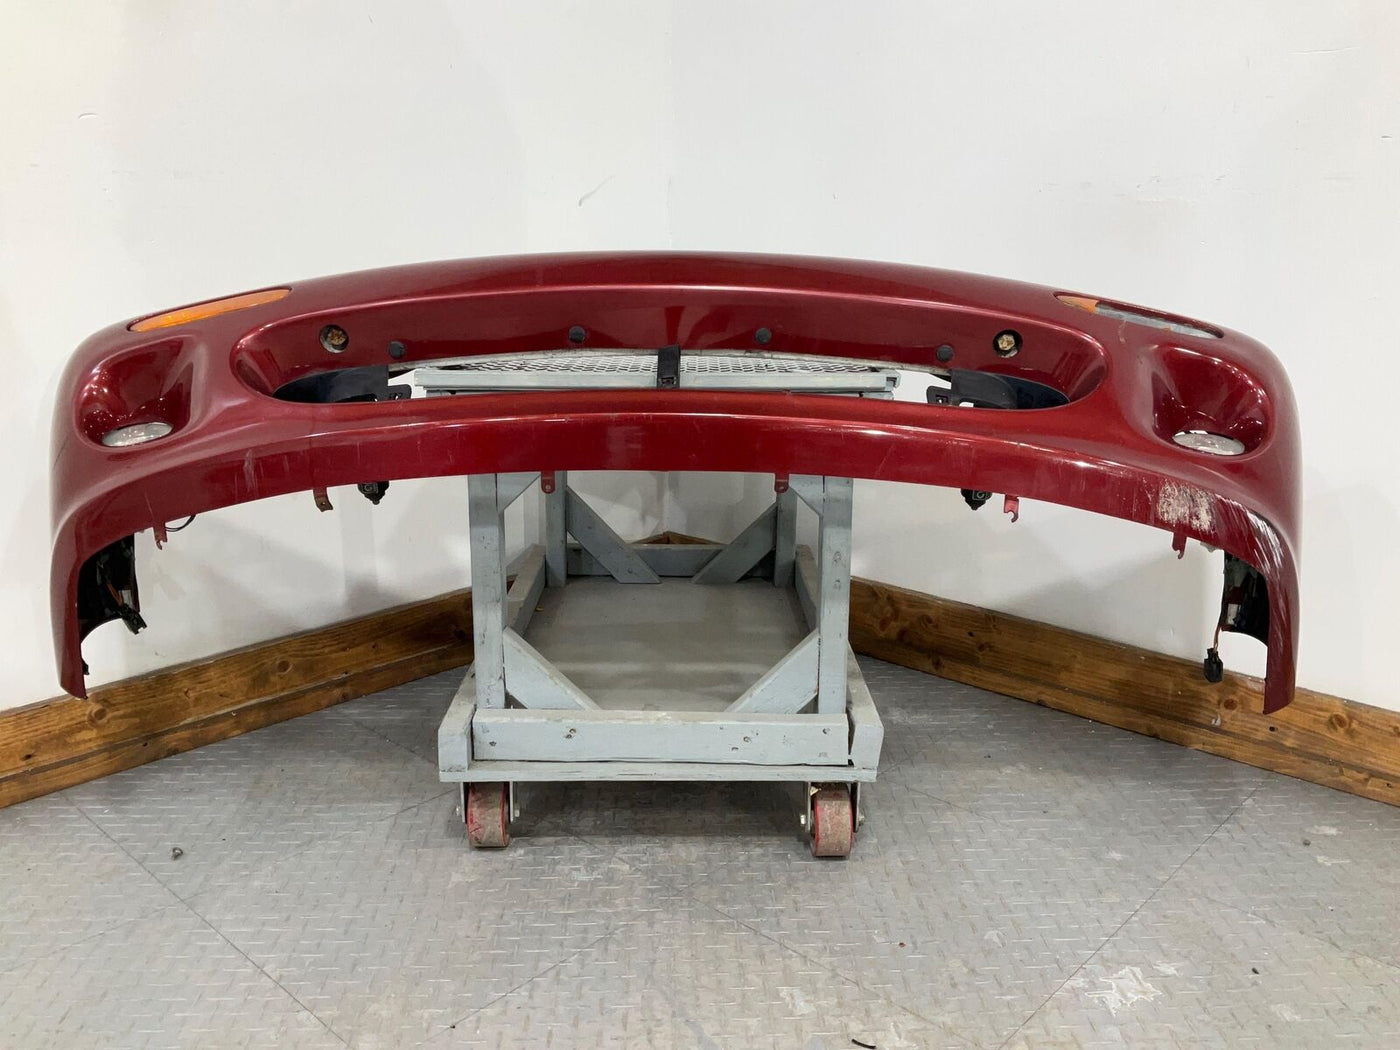 98-03 Jaguar XJ8 Front Bumper Cover W/ All Lights (Carnival Red CCG) See Notes